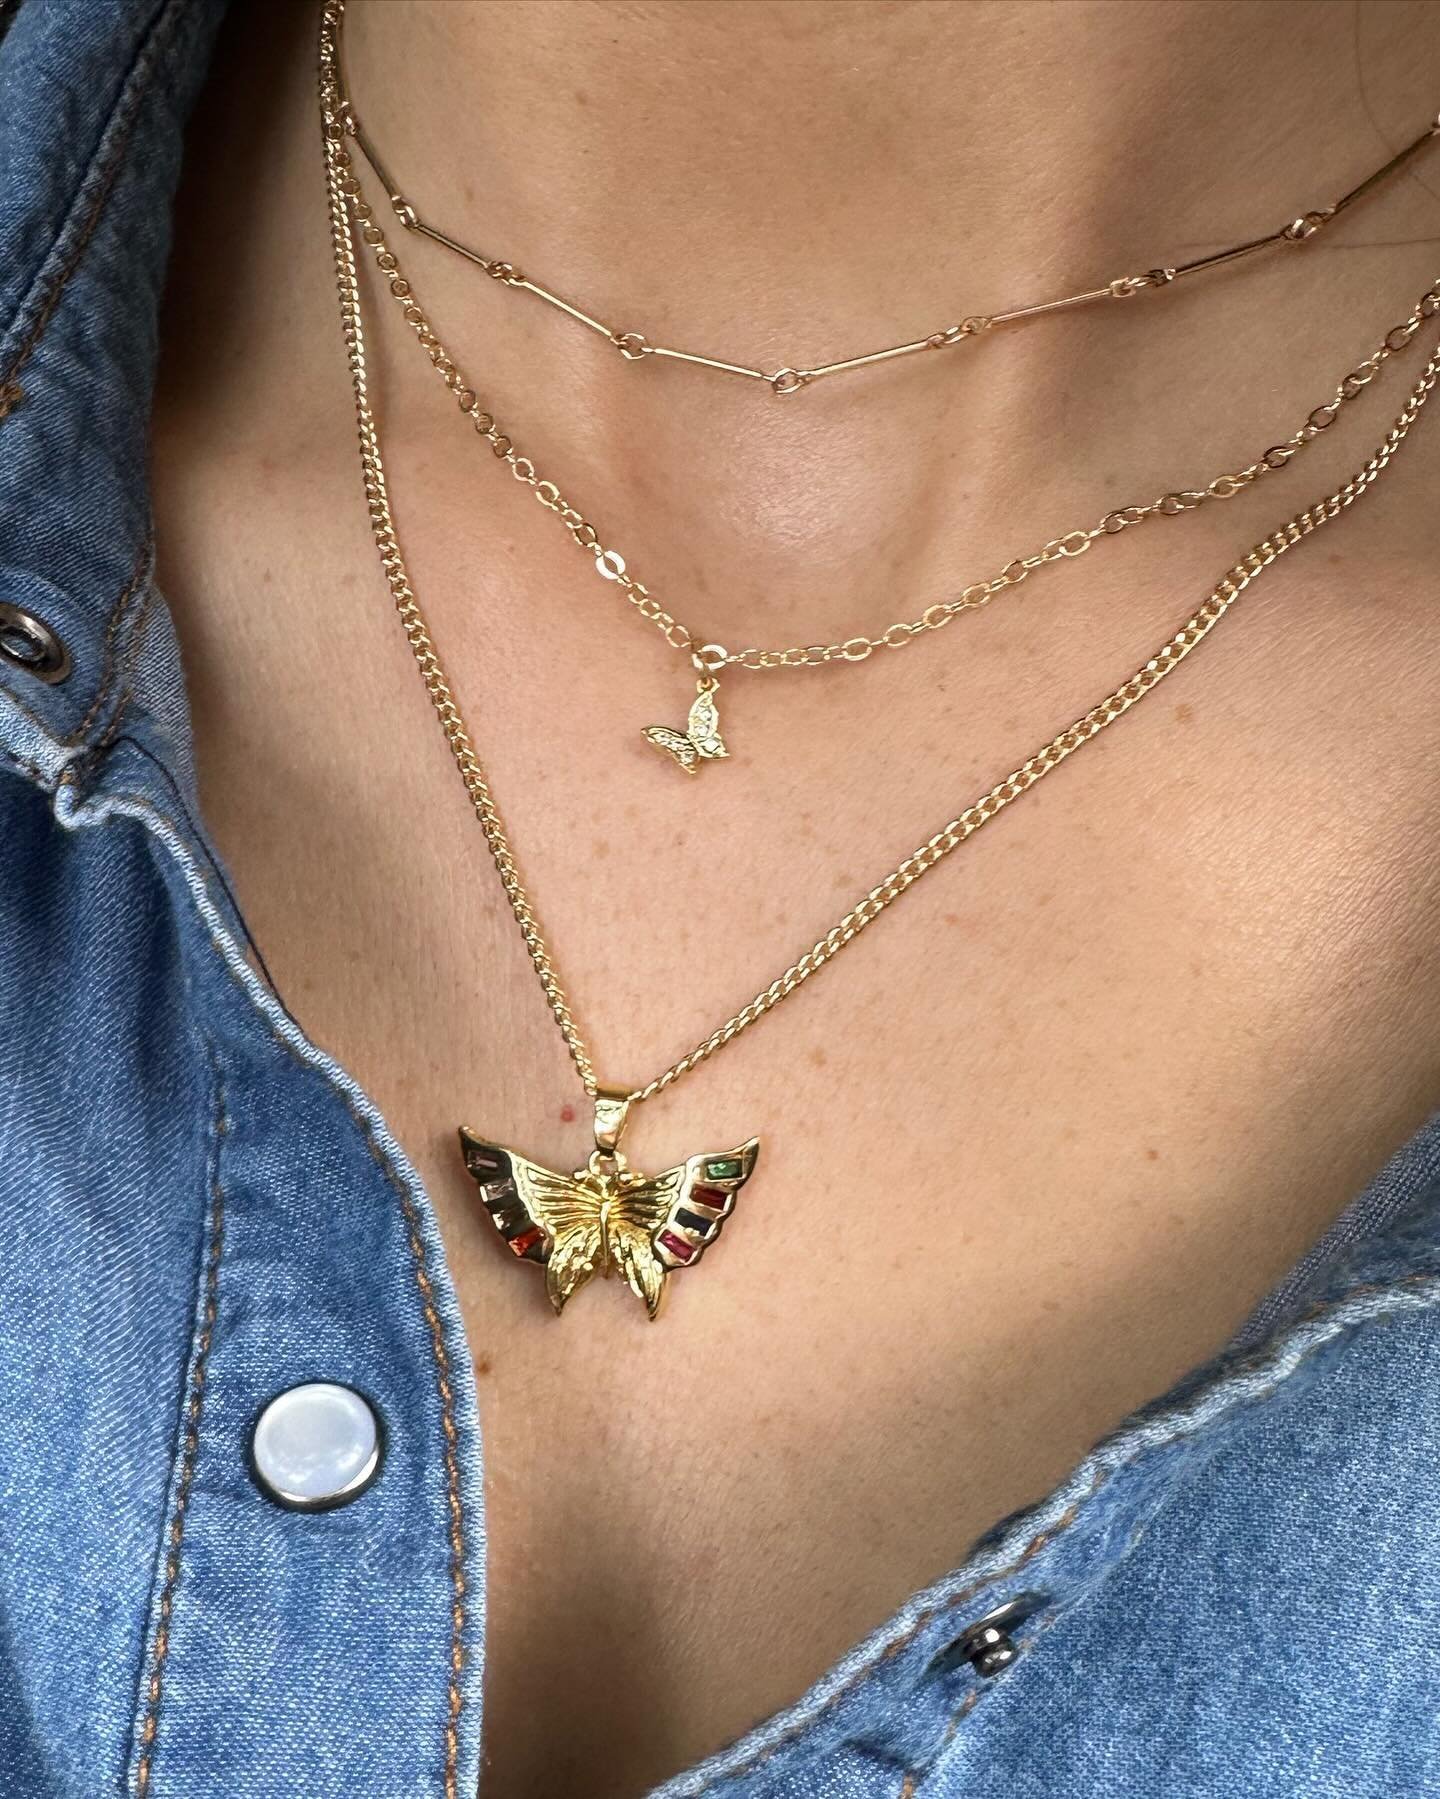 Meaningful matching necklaces for Mom and Daughter! Who doesn&rsquo;t love a good matching set? 💕

Today is the last day for free shipping and to get your Mother&rsquo;s Day gift in time for Sunday. Use our code: TWODAY to save.

Shop now at racheln